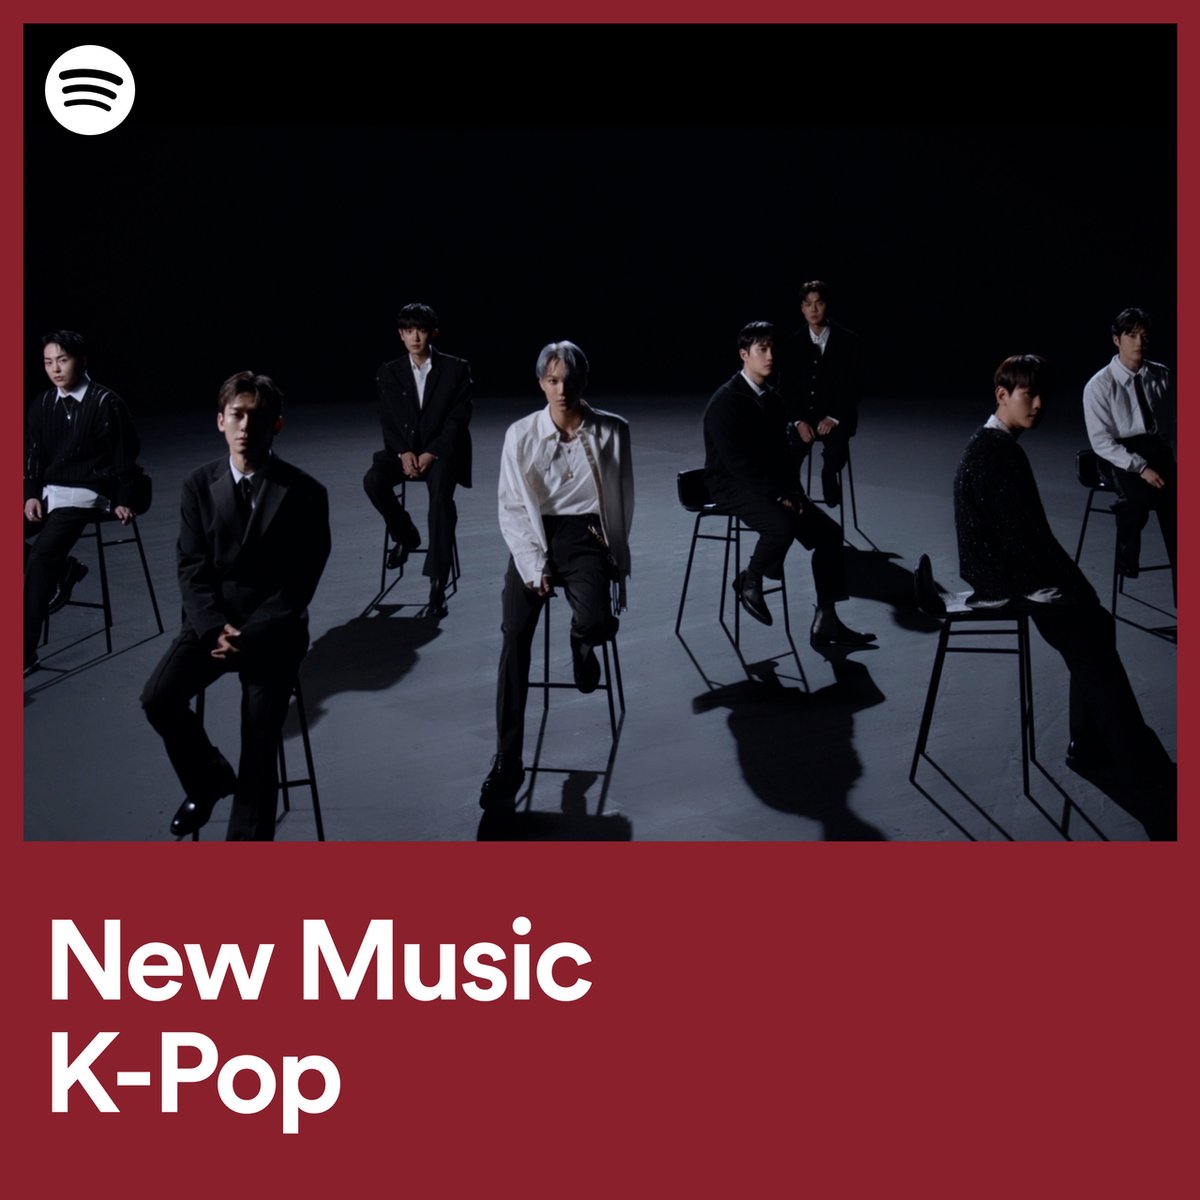 Check us out on the cover of @Spotify New Music K-Pop playlist and stream our new song 'Let Me In' 🤍

🎧 spoti.fi/3nBbX4d
✨ spoti.fi/43RU5Bj

#EXO #엑소 #weareoneEXO
#EXIST #EXO_EXIST
#LetMeIn #EXO_LetMeIn
@SpotifyKpop @SpotifyKR